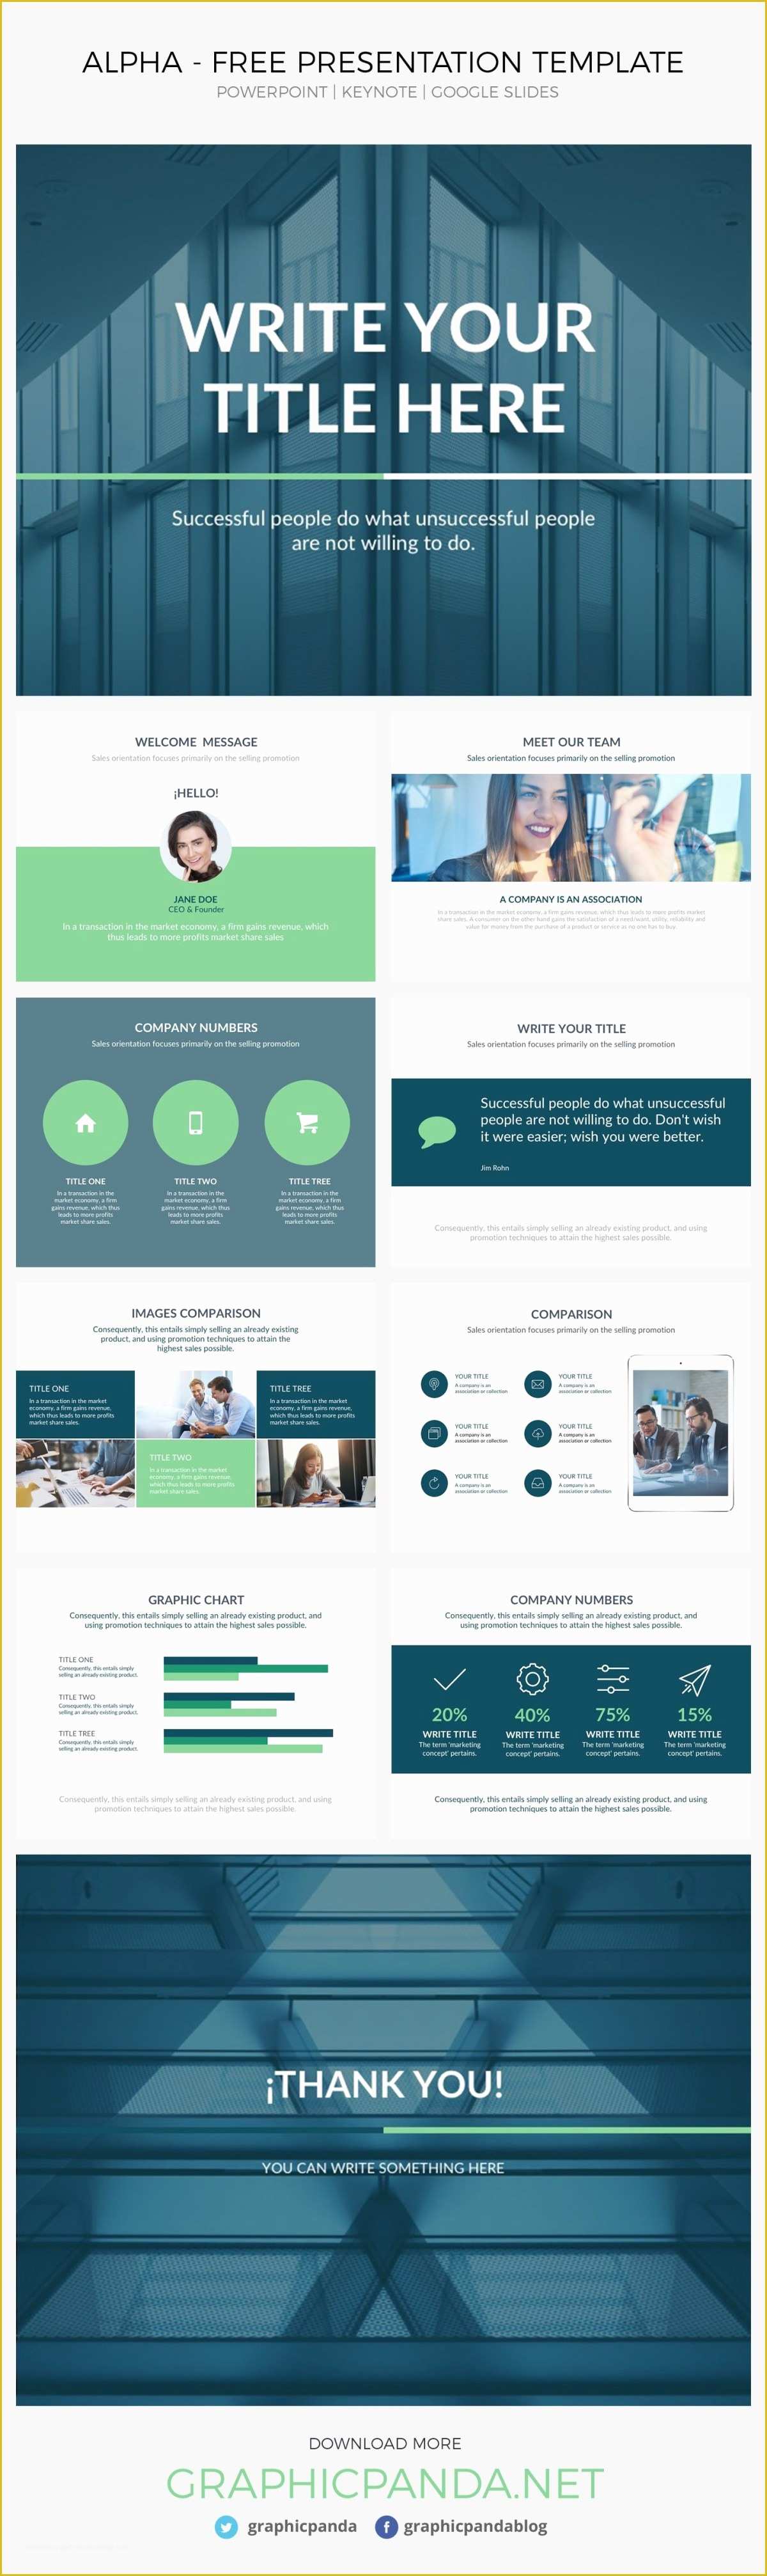 Free Keynote Templates 2017 Of top 69 Best Free Keynote Templates Updated March 2019